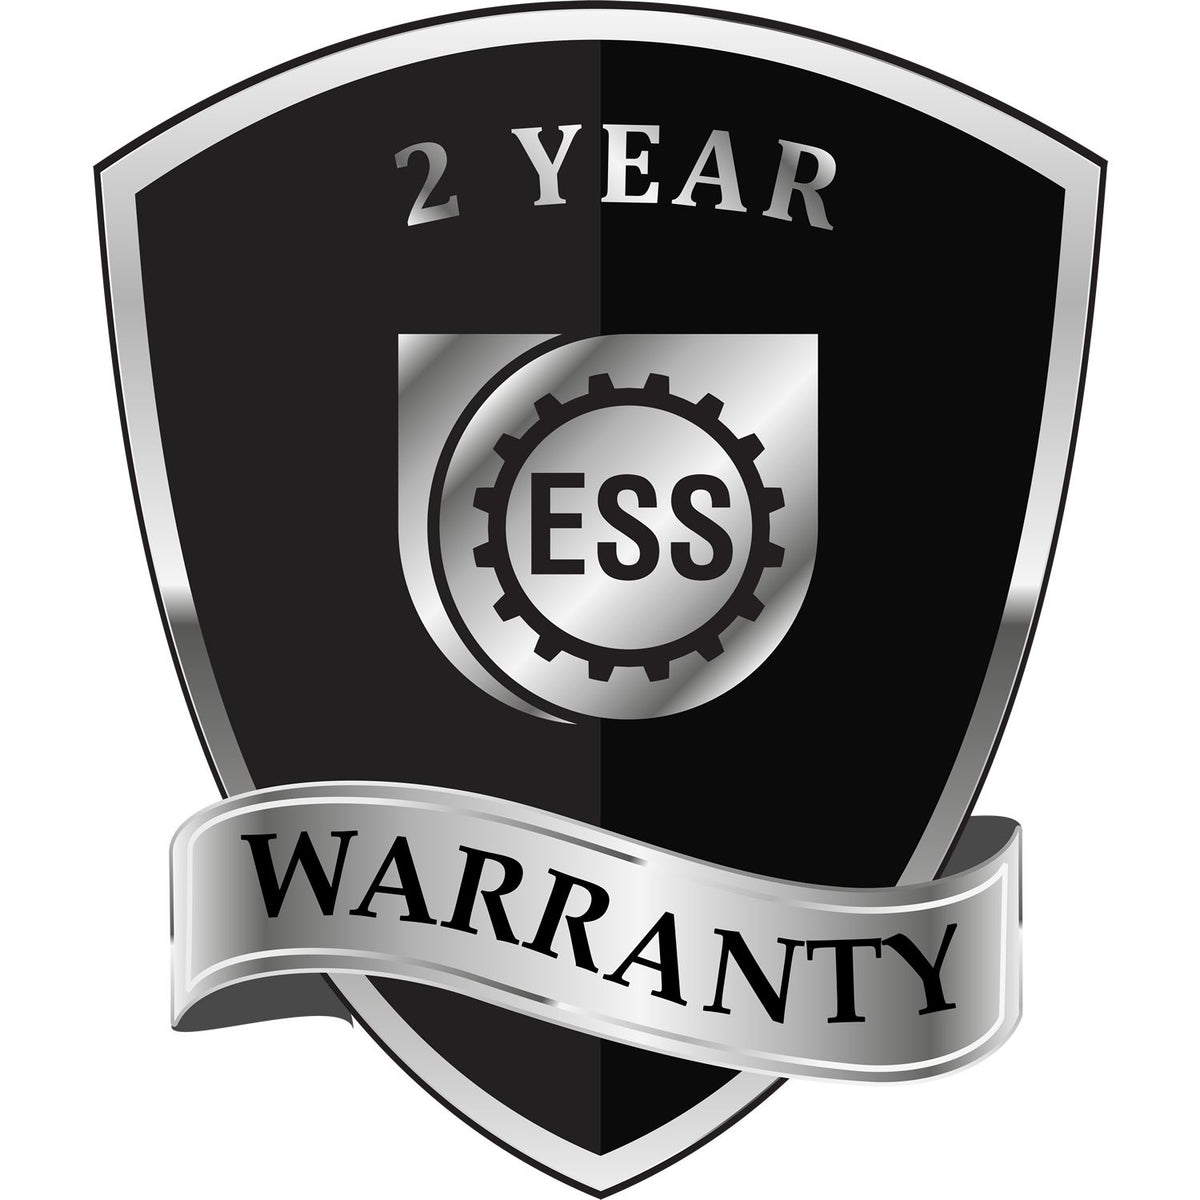 A badge or emblem showing a warranty icon for the Washington Engineer Desk Seal